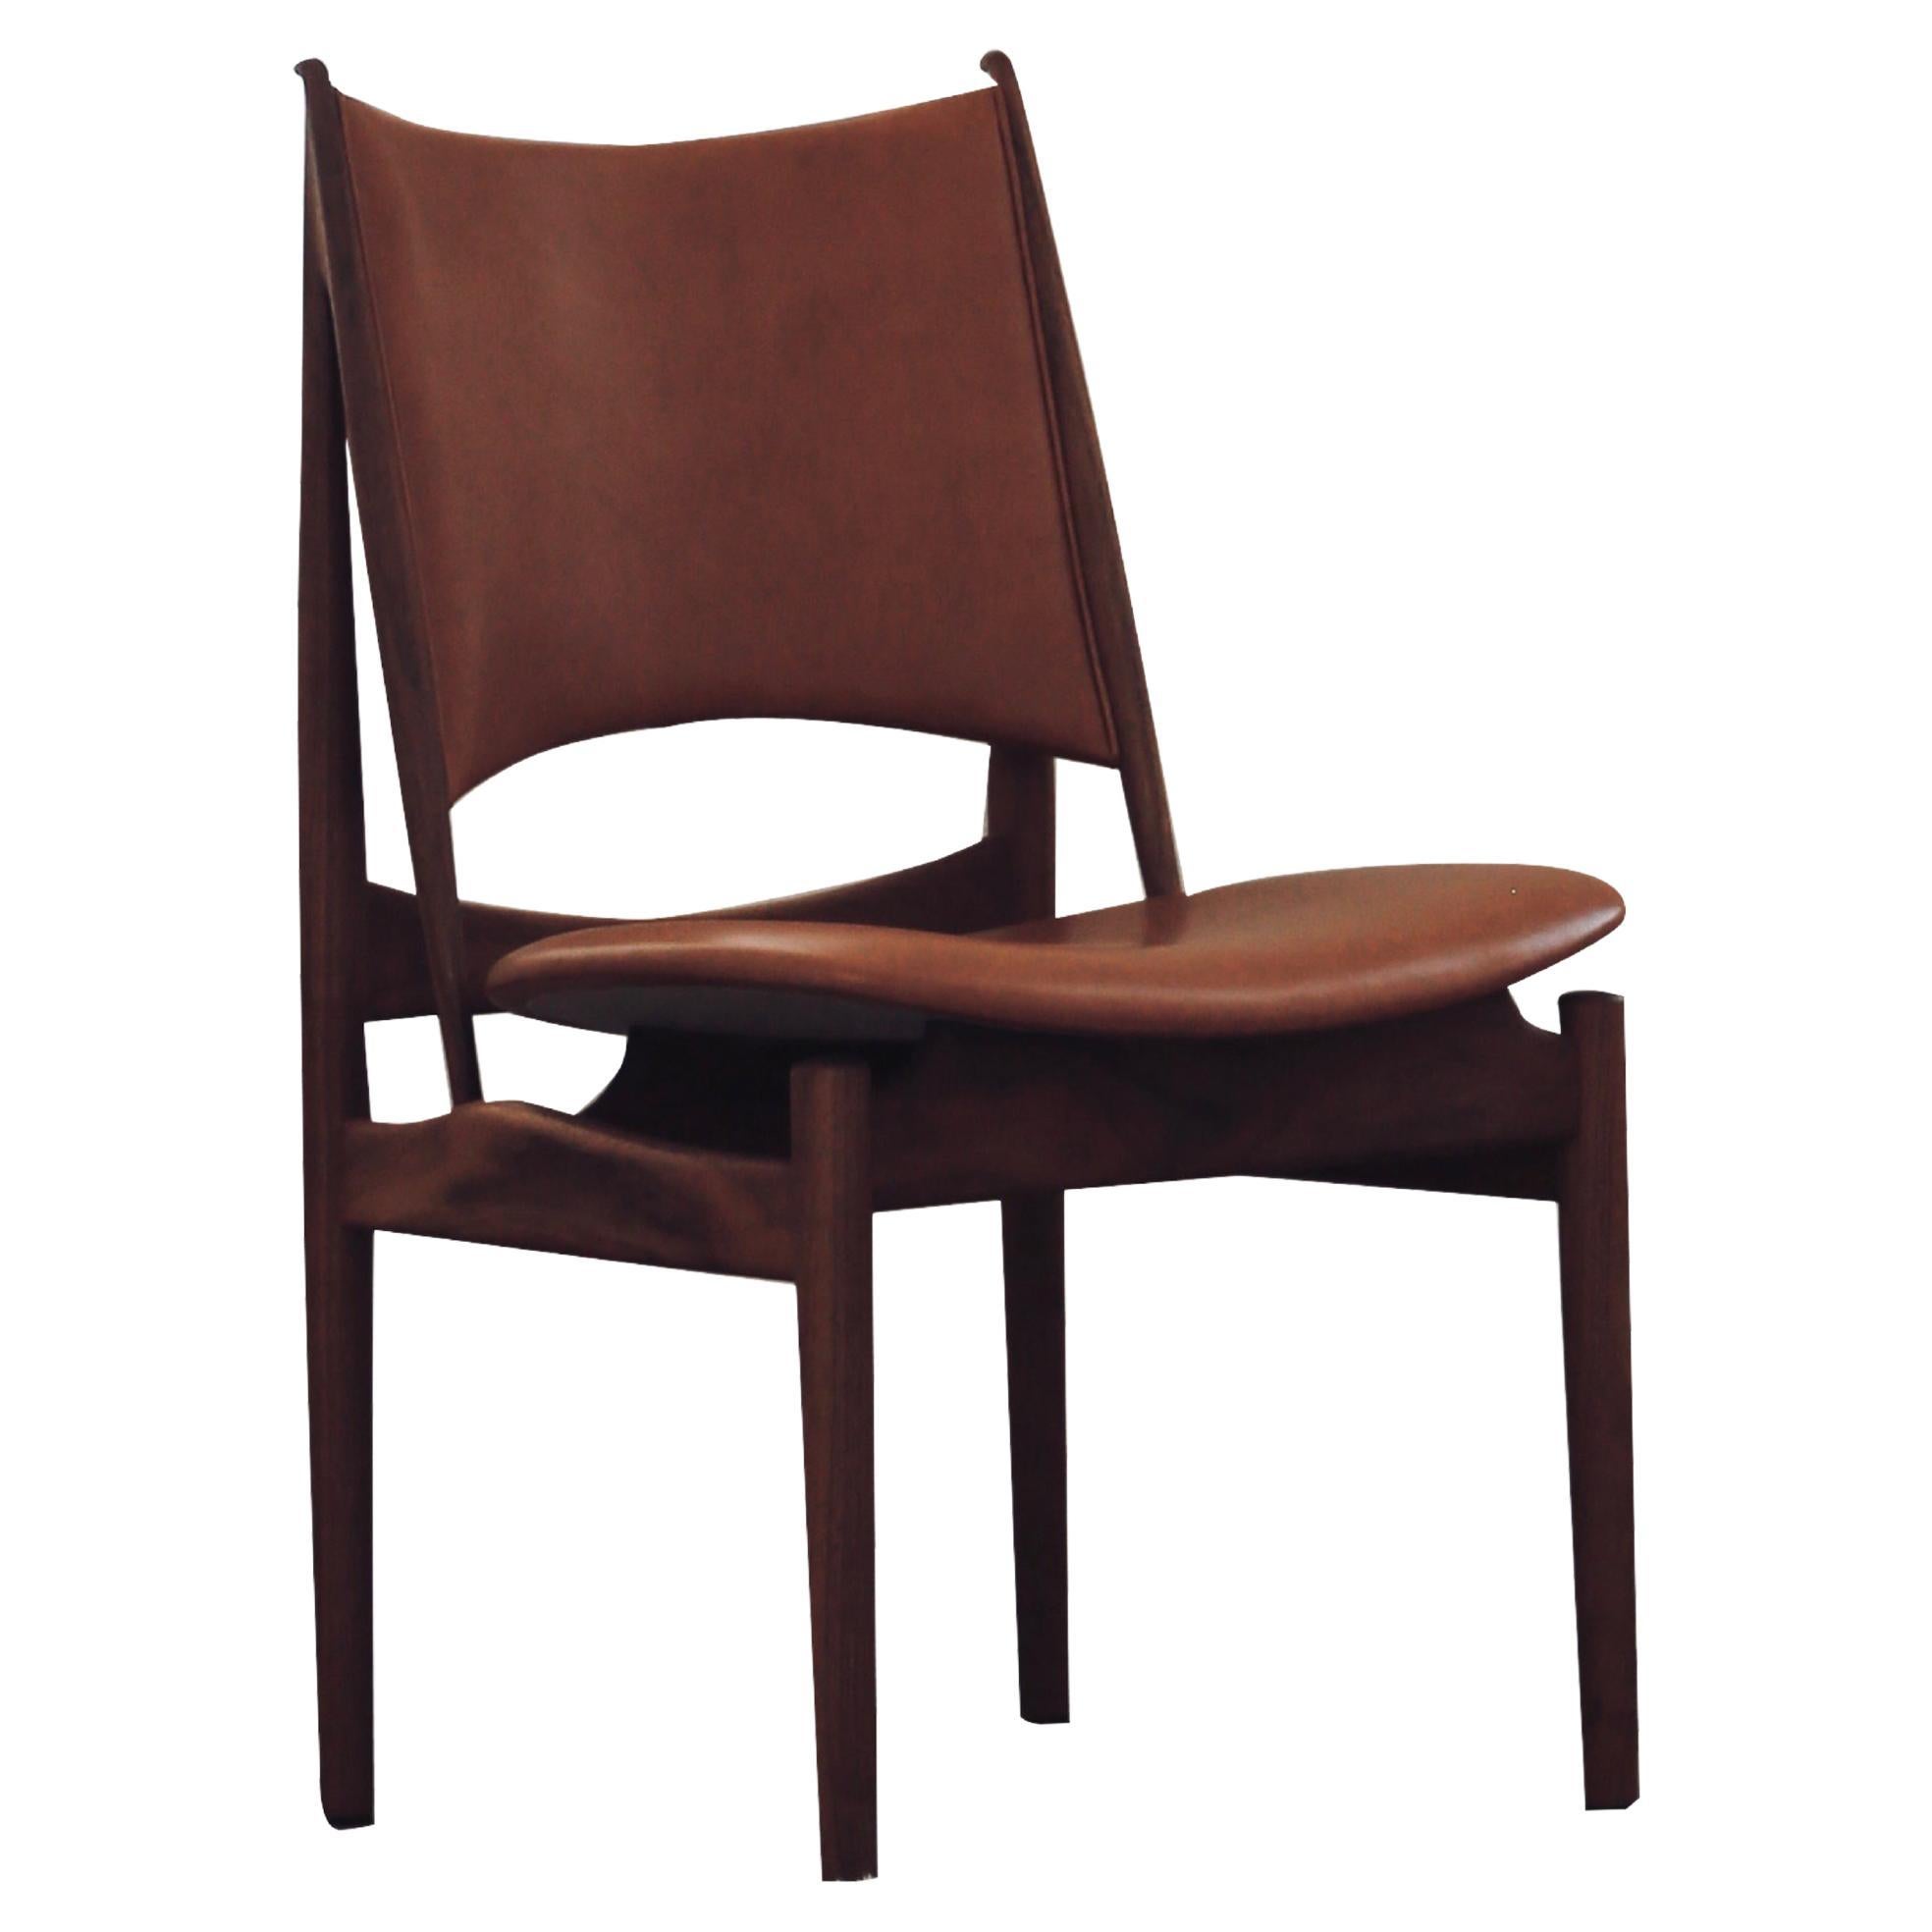 Finn Juhl Egypetian Chair in Wood and Leather